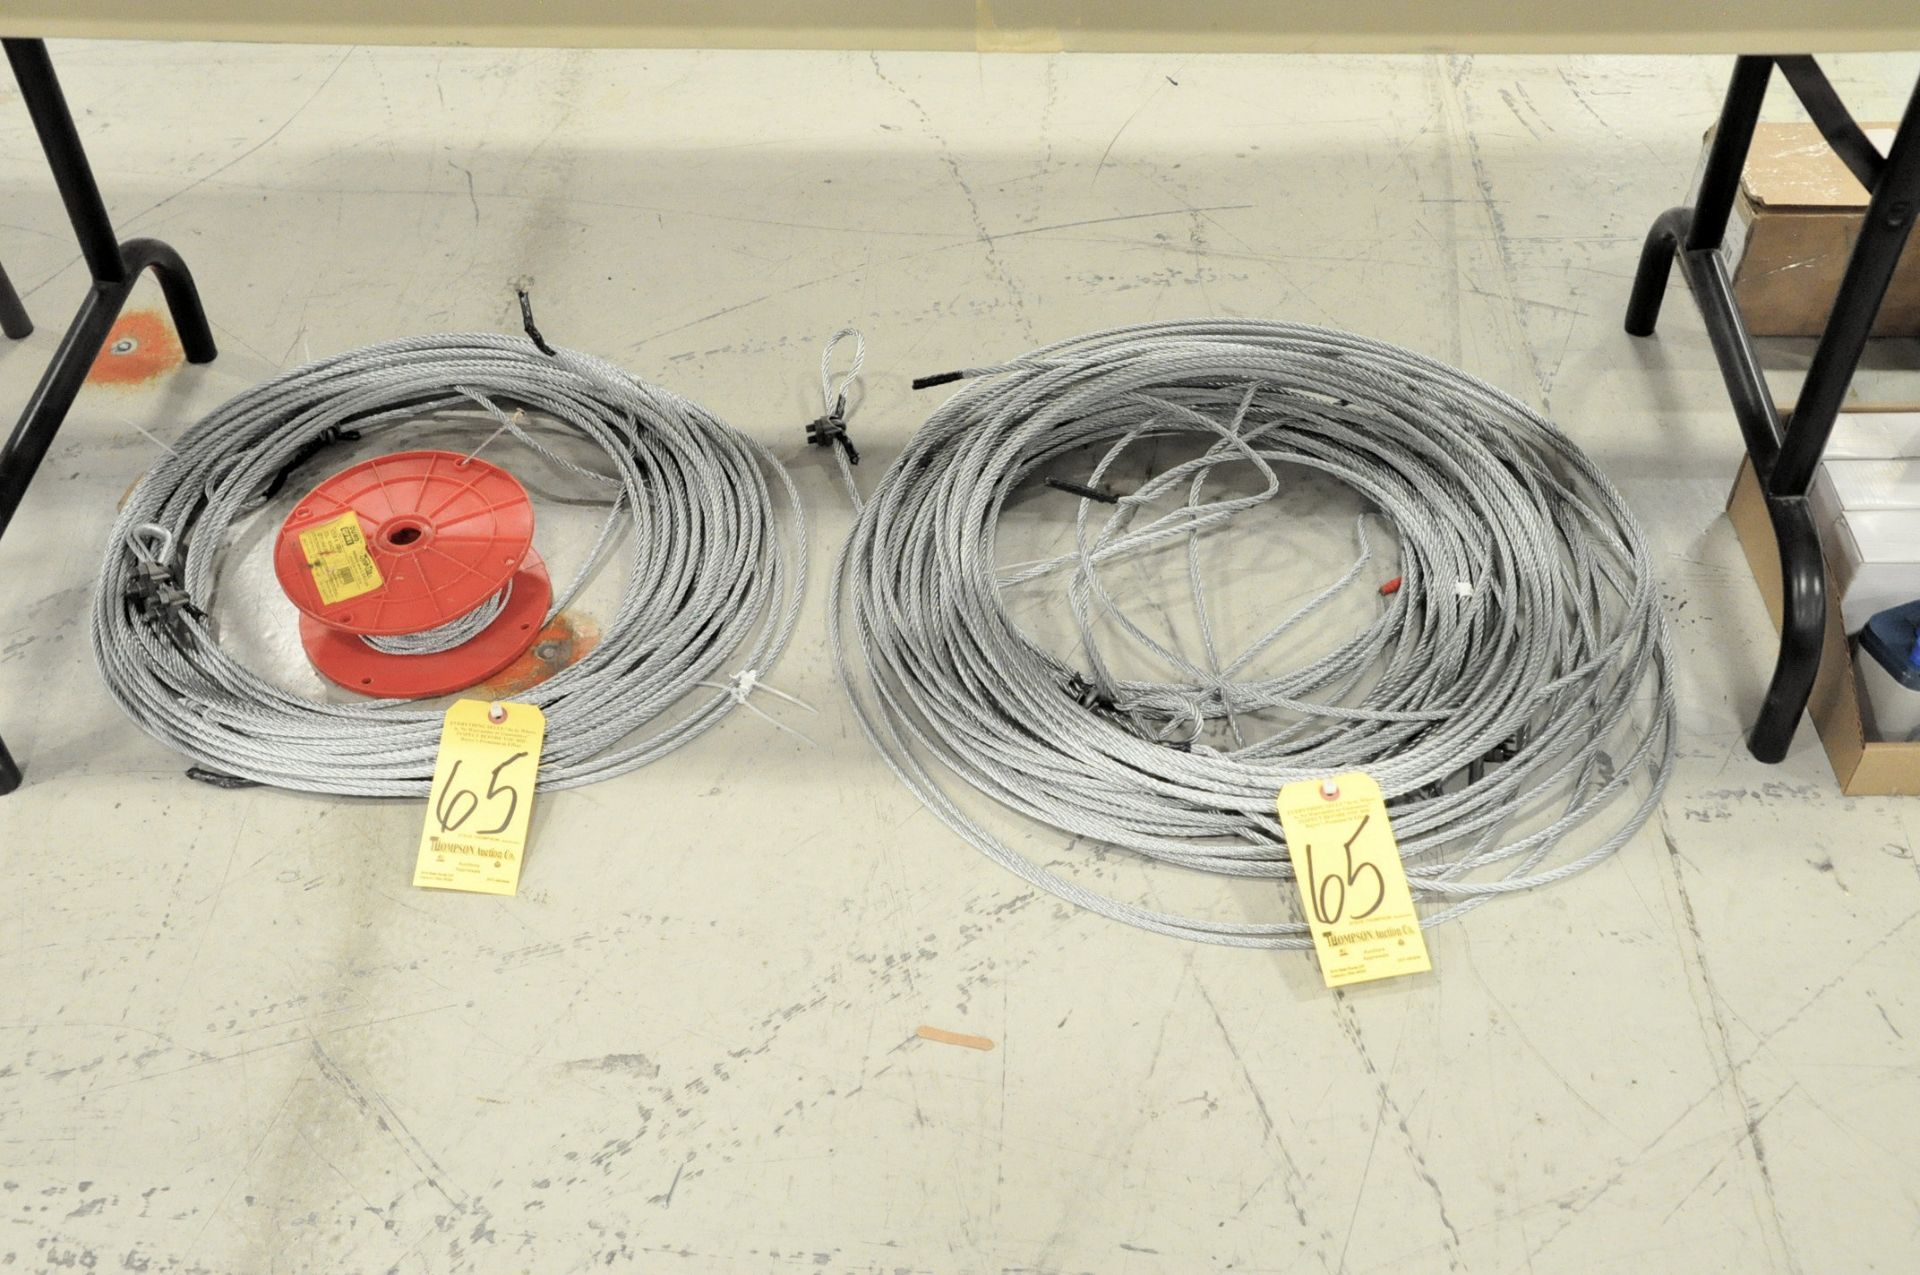 Lot-(2) Various Steel Wire Ropes and Small Spool of Cable on Floor Under (1) Table